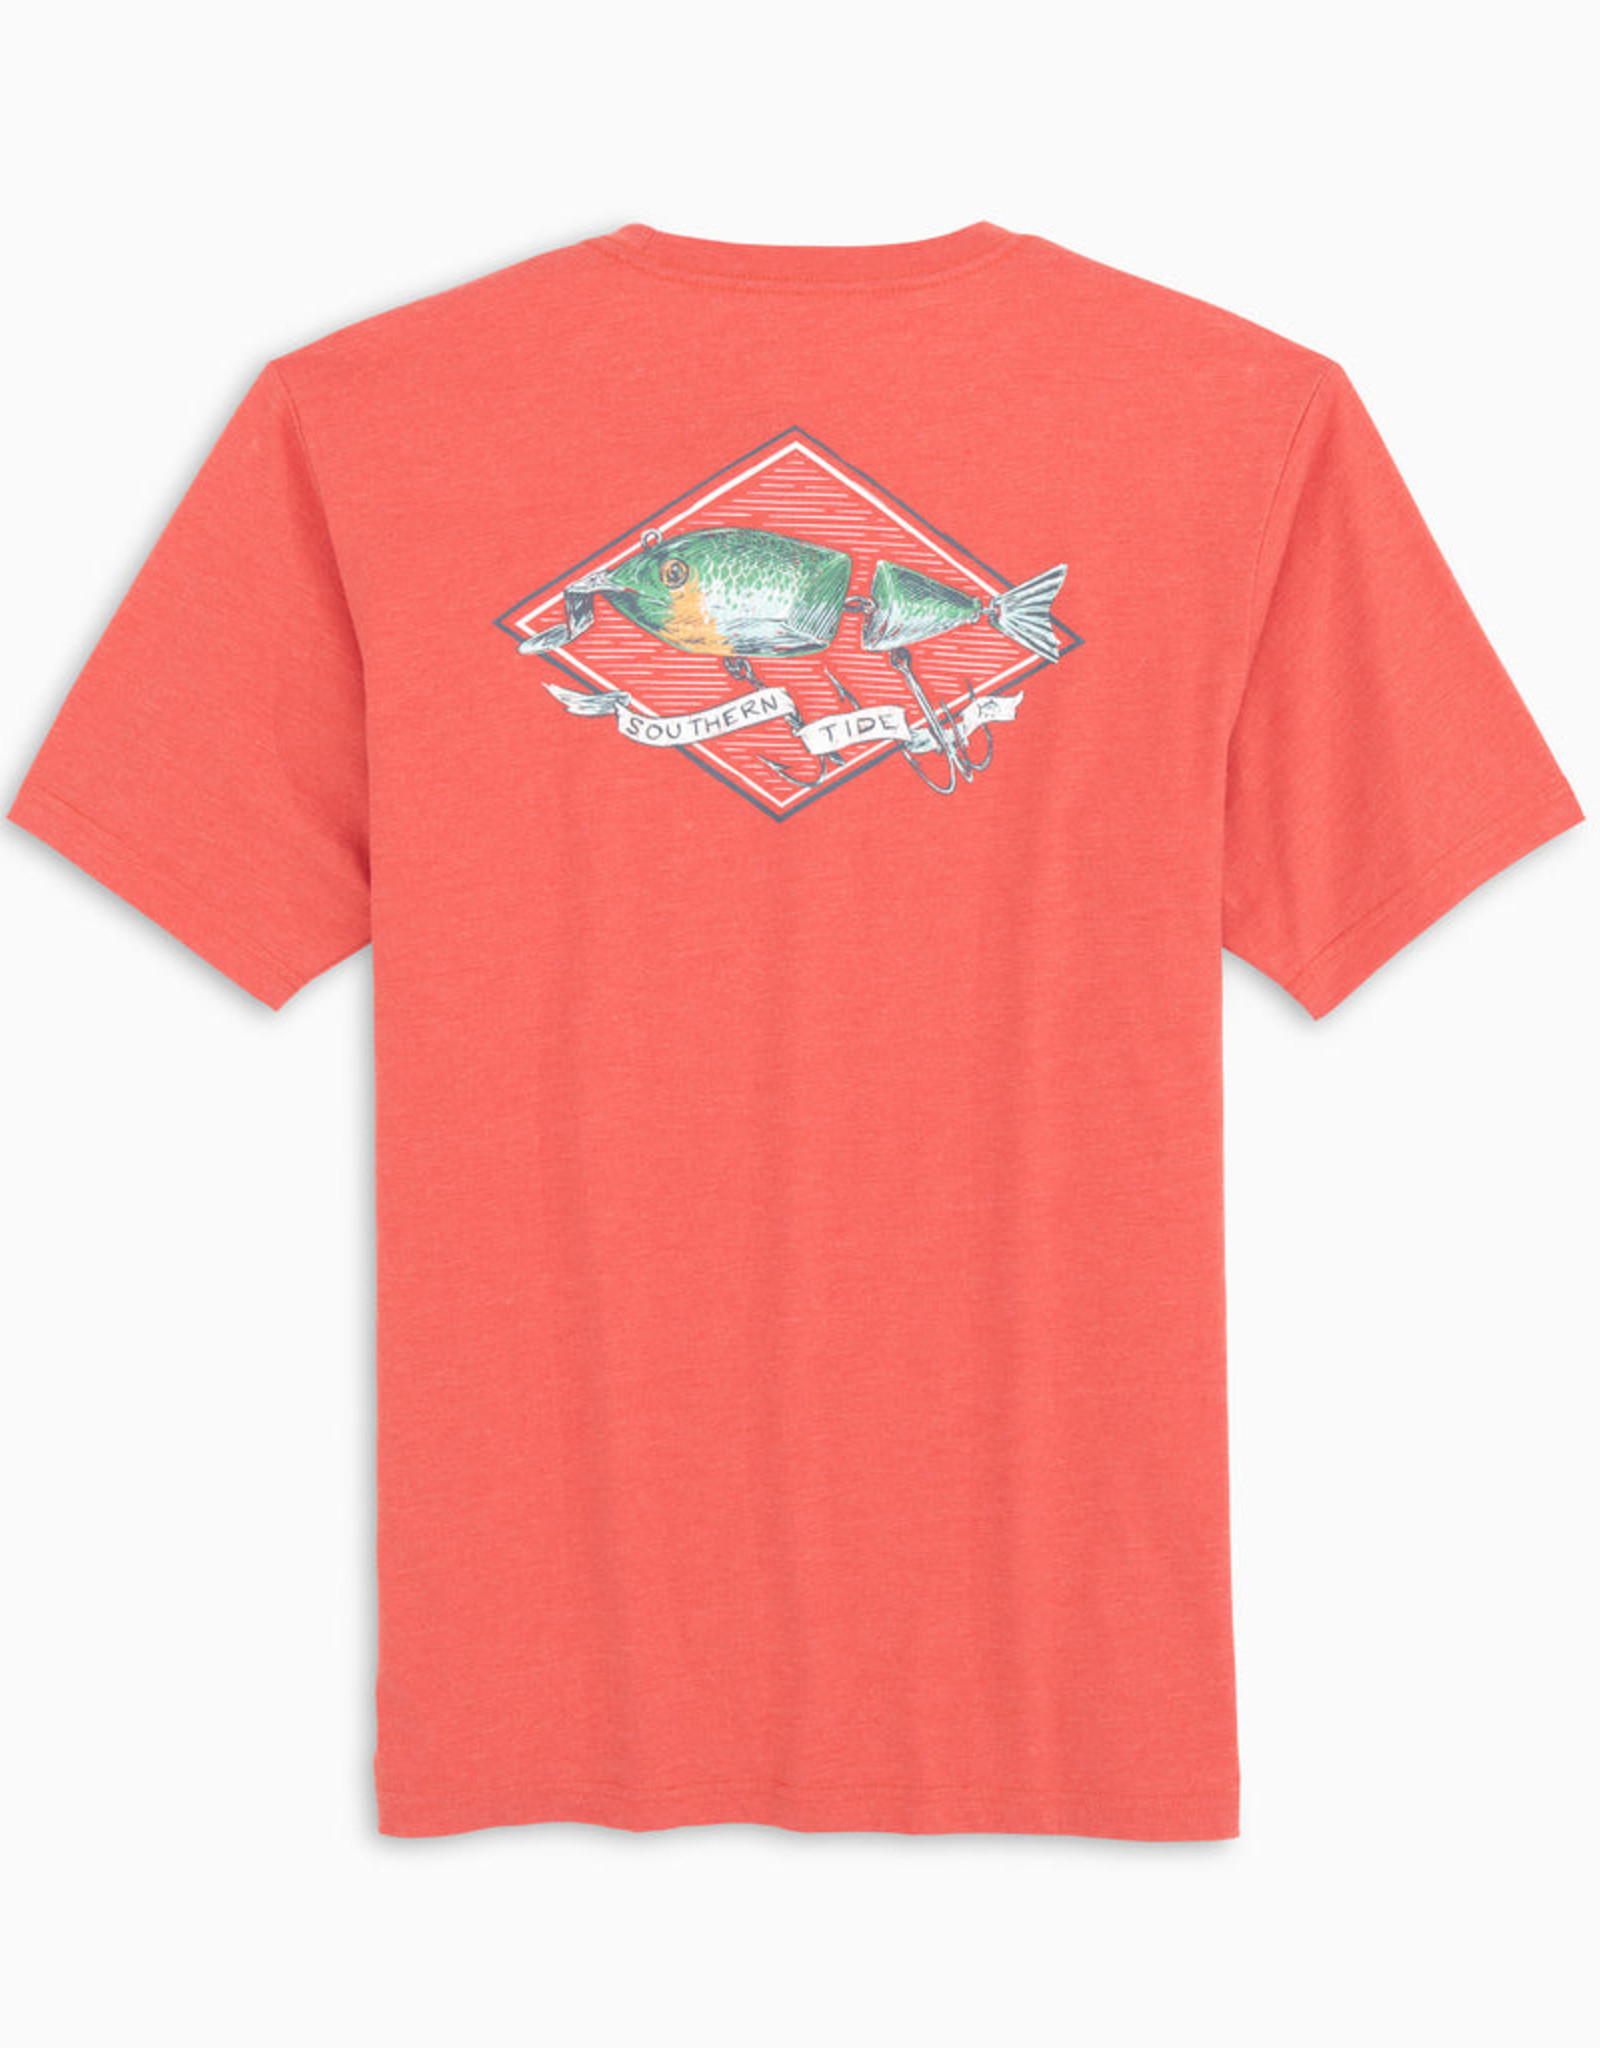 ODR Reel Southern Lure T-Shirt